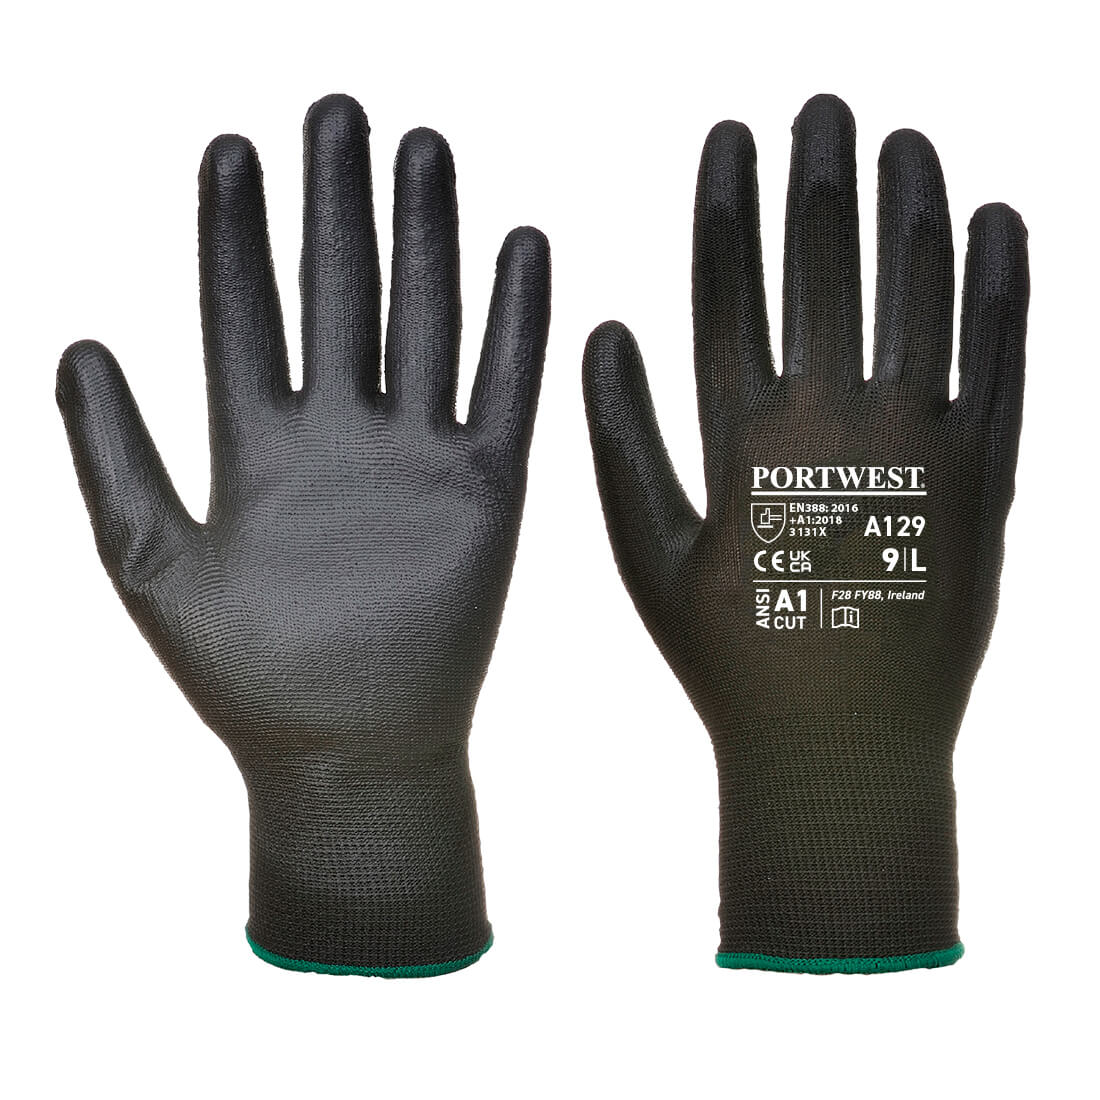 Portwest A129 PU Palm Glove - Carton (480 Pairs) for General Handling